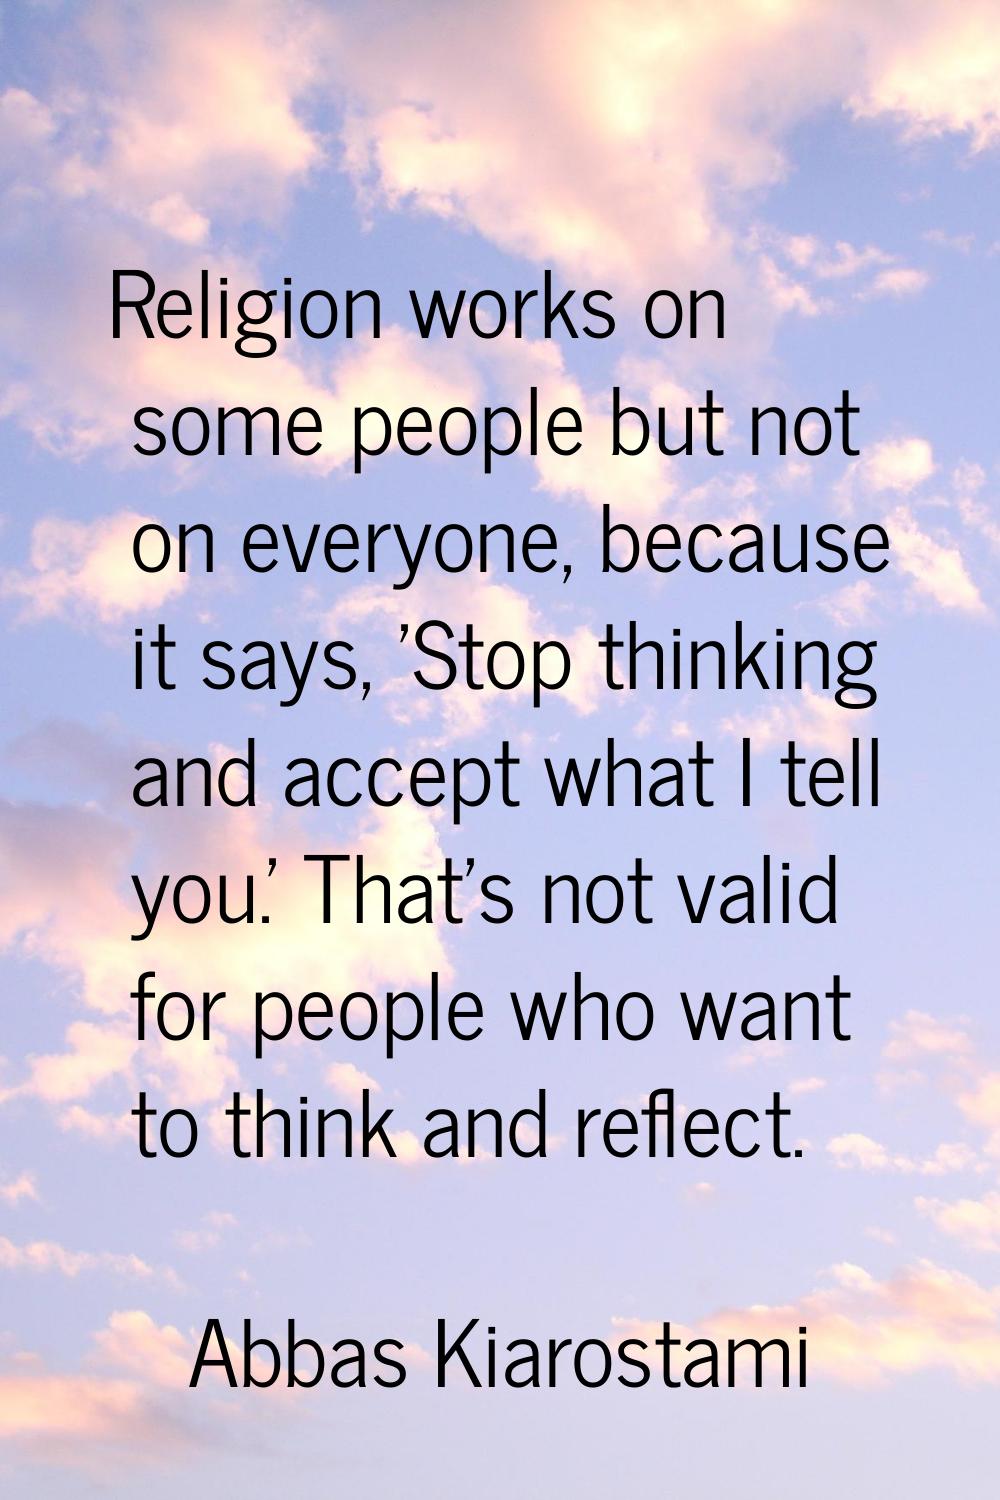 Religion works on some people but not on everyone, because it says, 'Stop thinking and accept what 